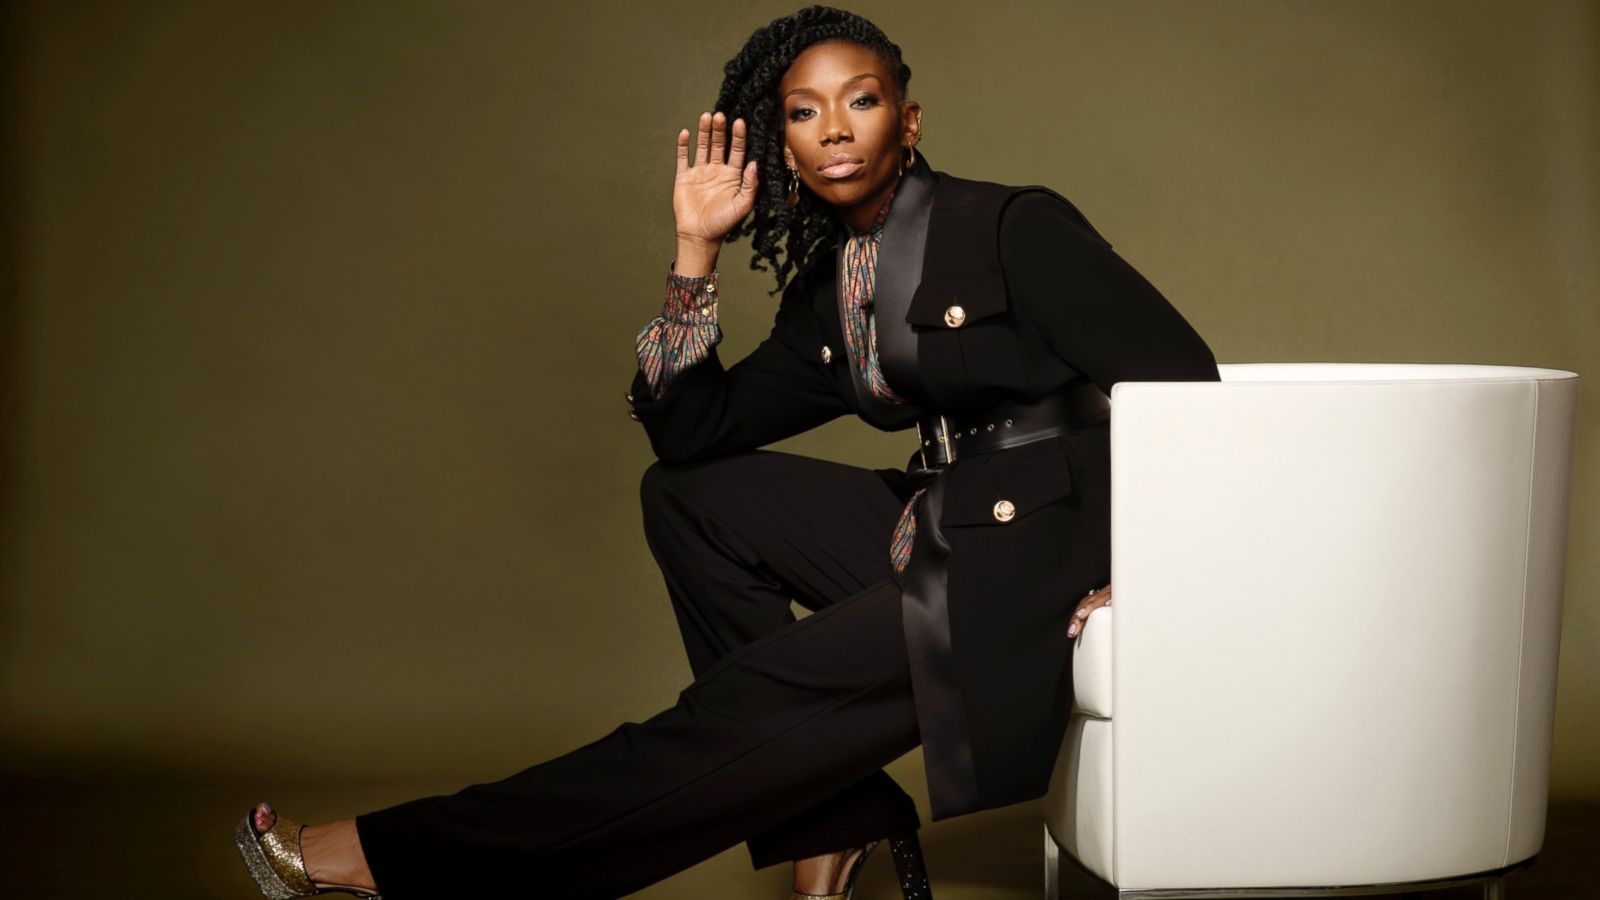 Singer Brandy is released from the hospital and resting at home - ABC News